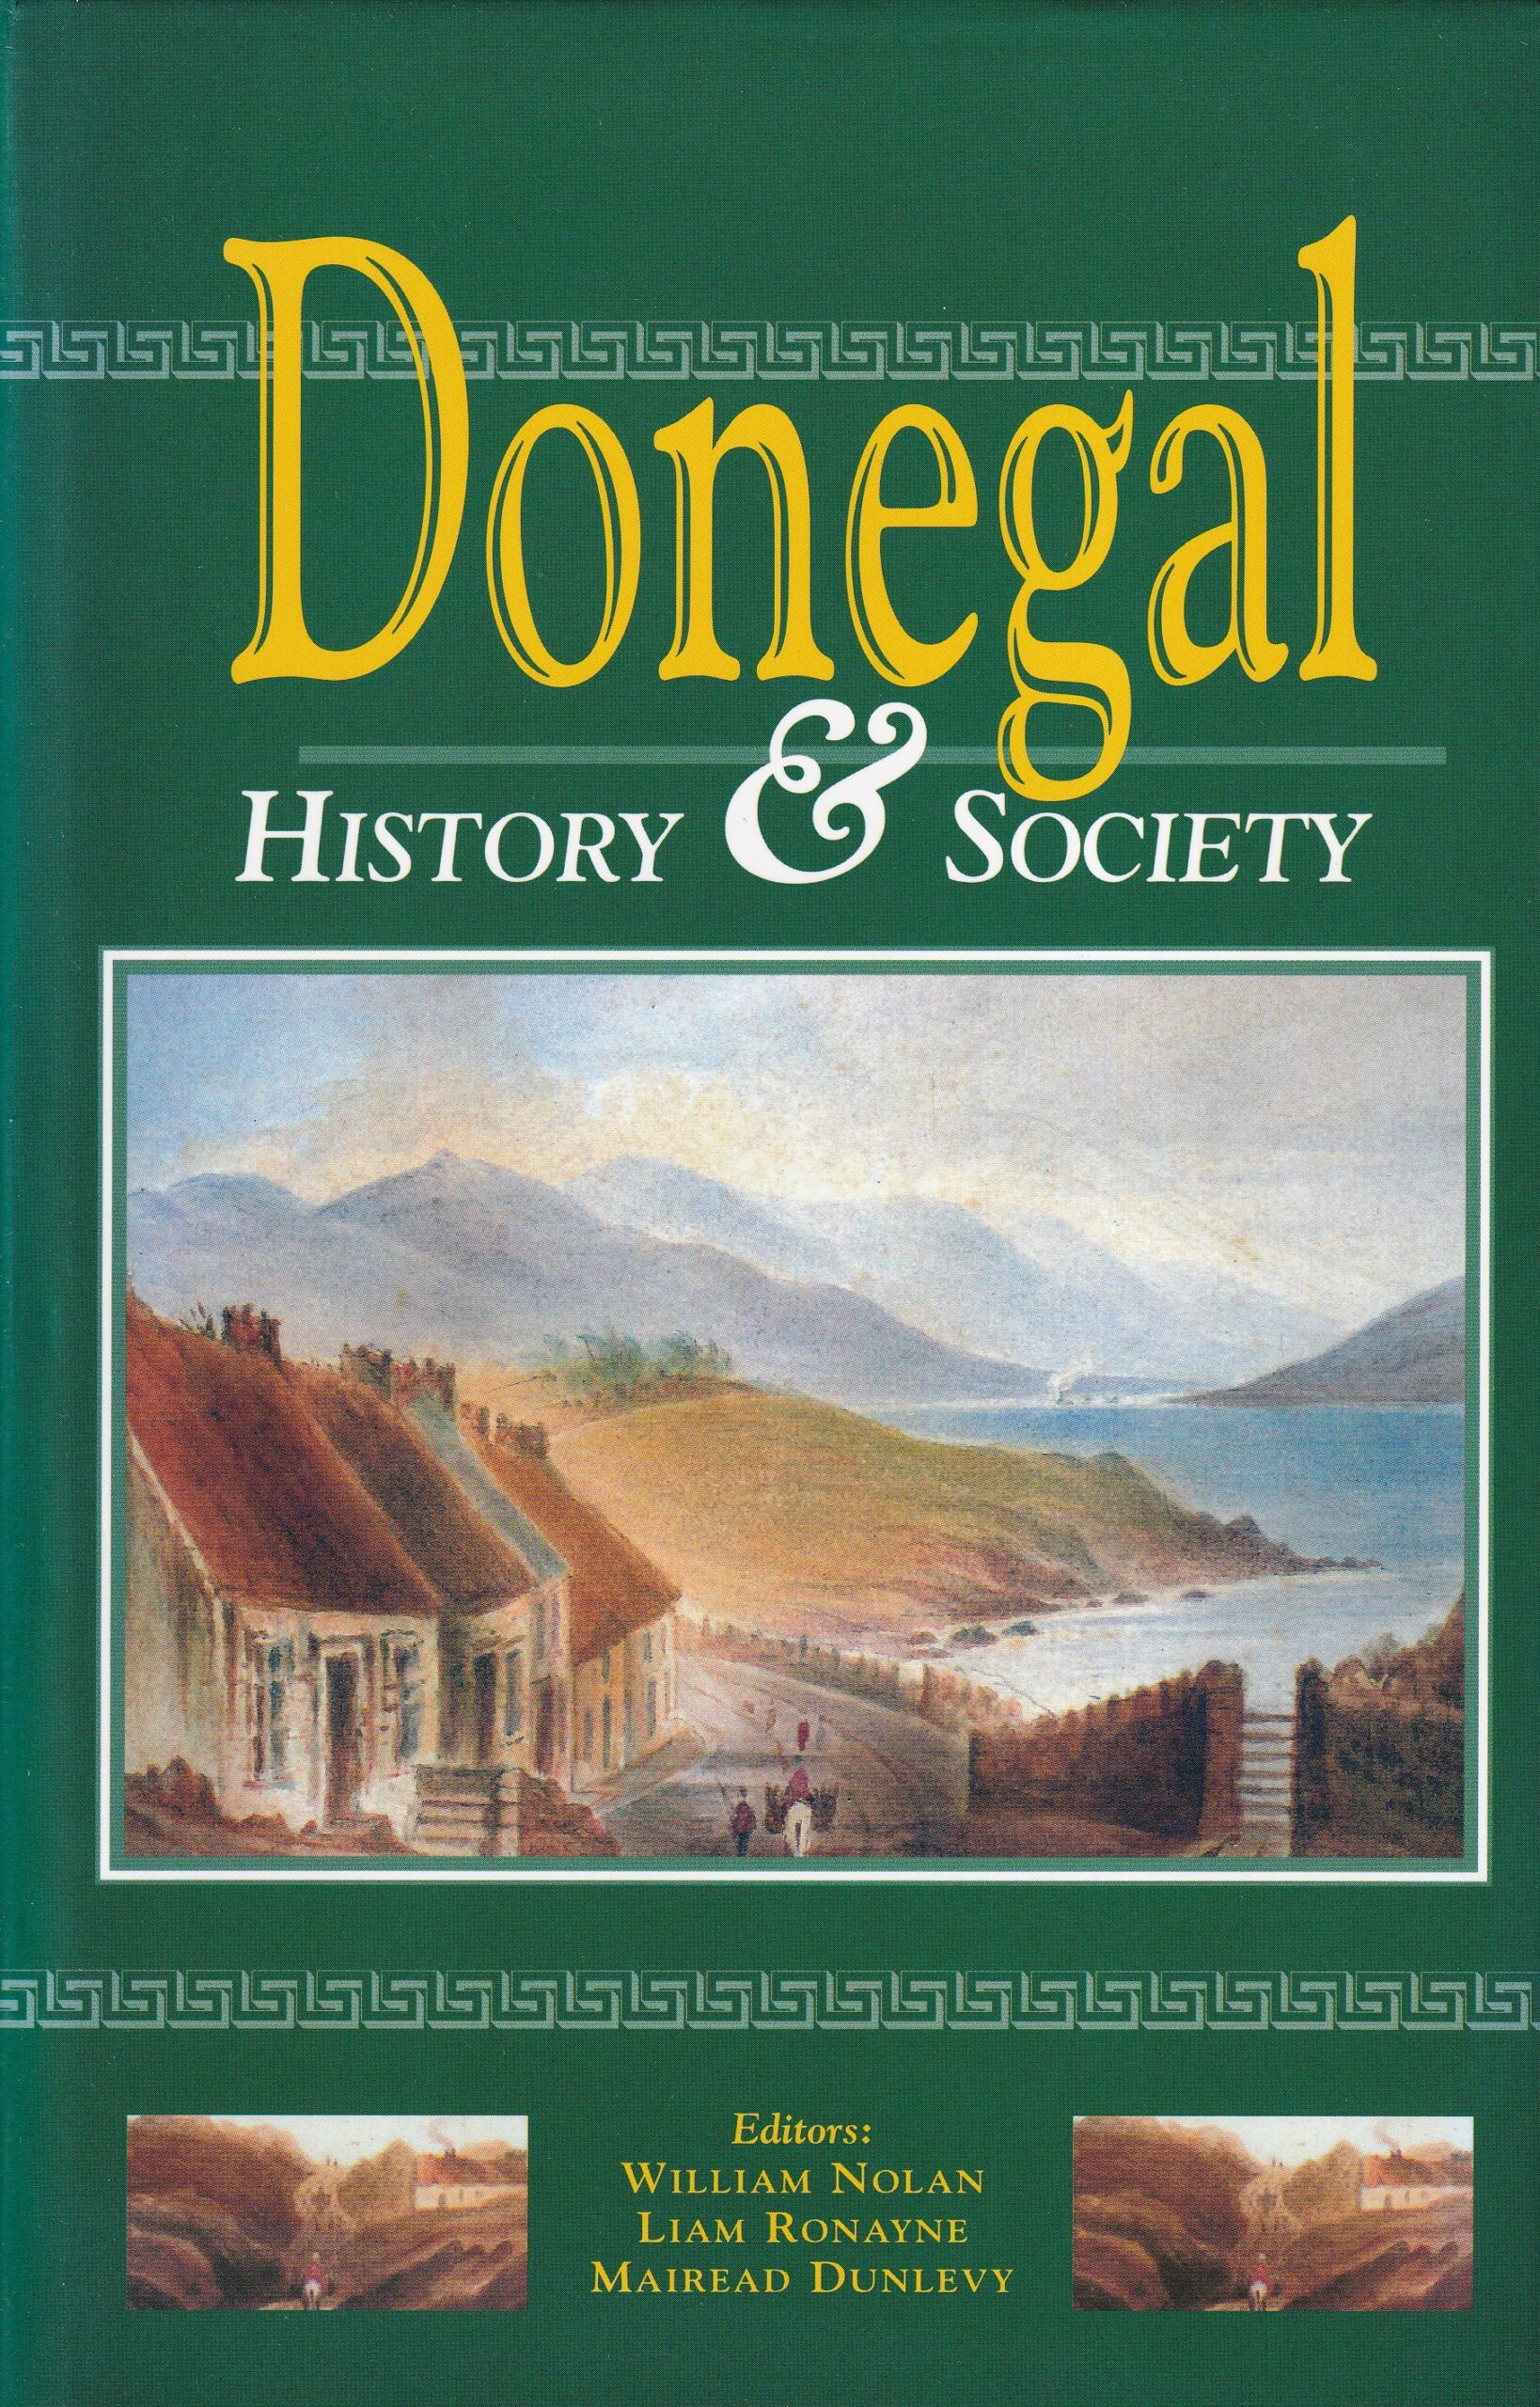 Donegal: History and Society | William Nolan, Liam Ronayne and Mairead Dunleavy (eds.) | Charlie Byrne's